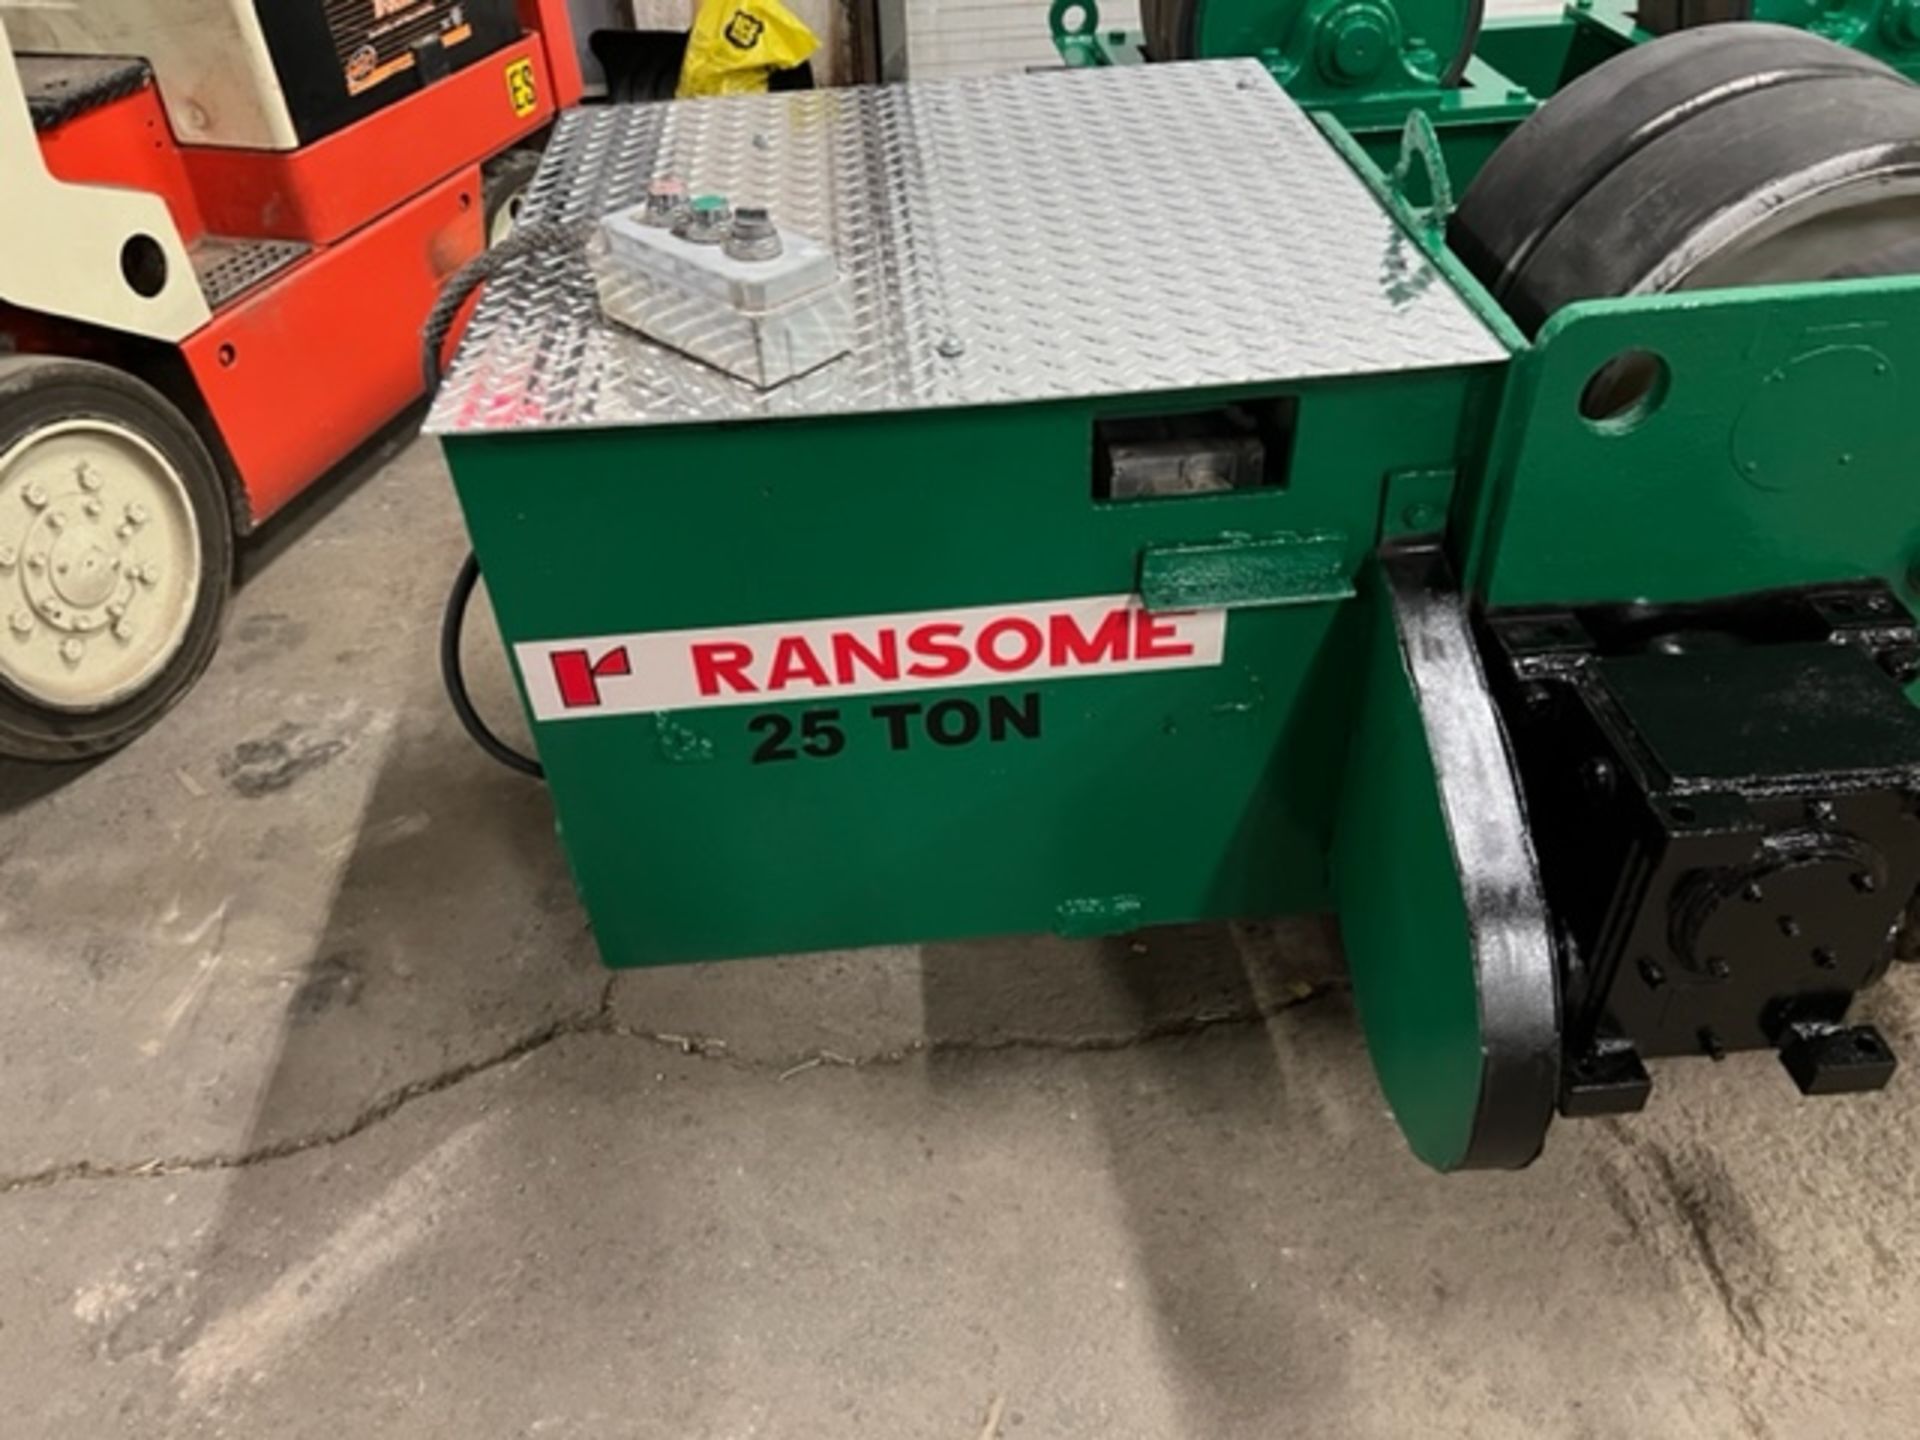 Ransome Tank Turning Rolls - Roller Unit extend to 8' diameter - 50,000lbs capacity - Image 2 of 4